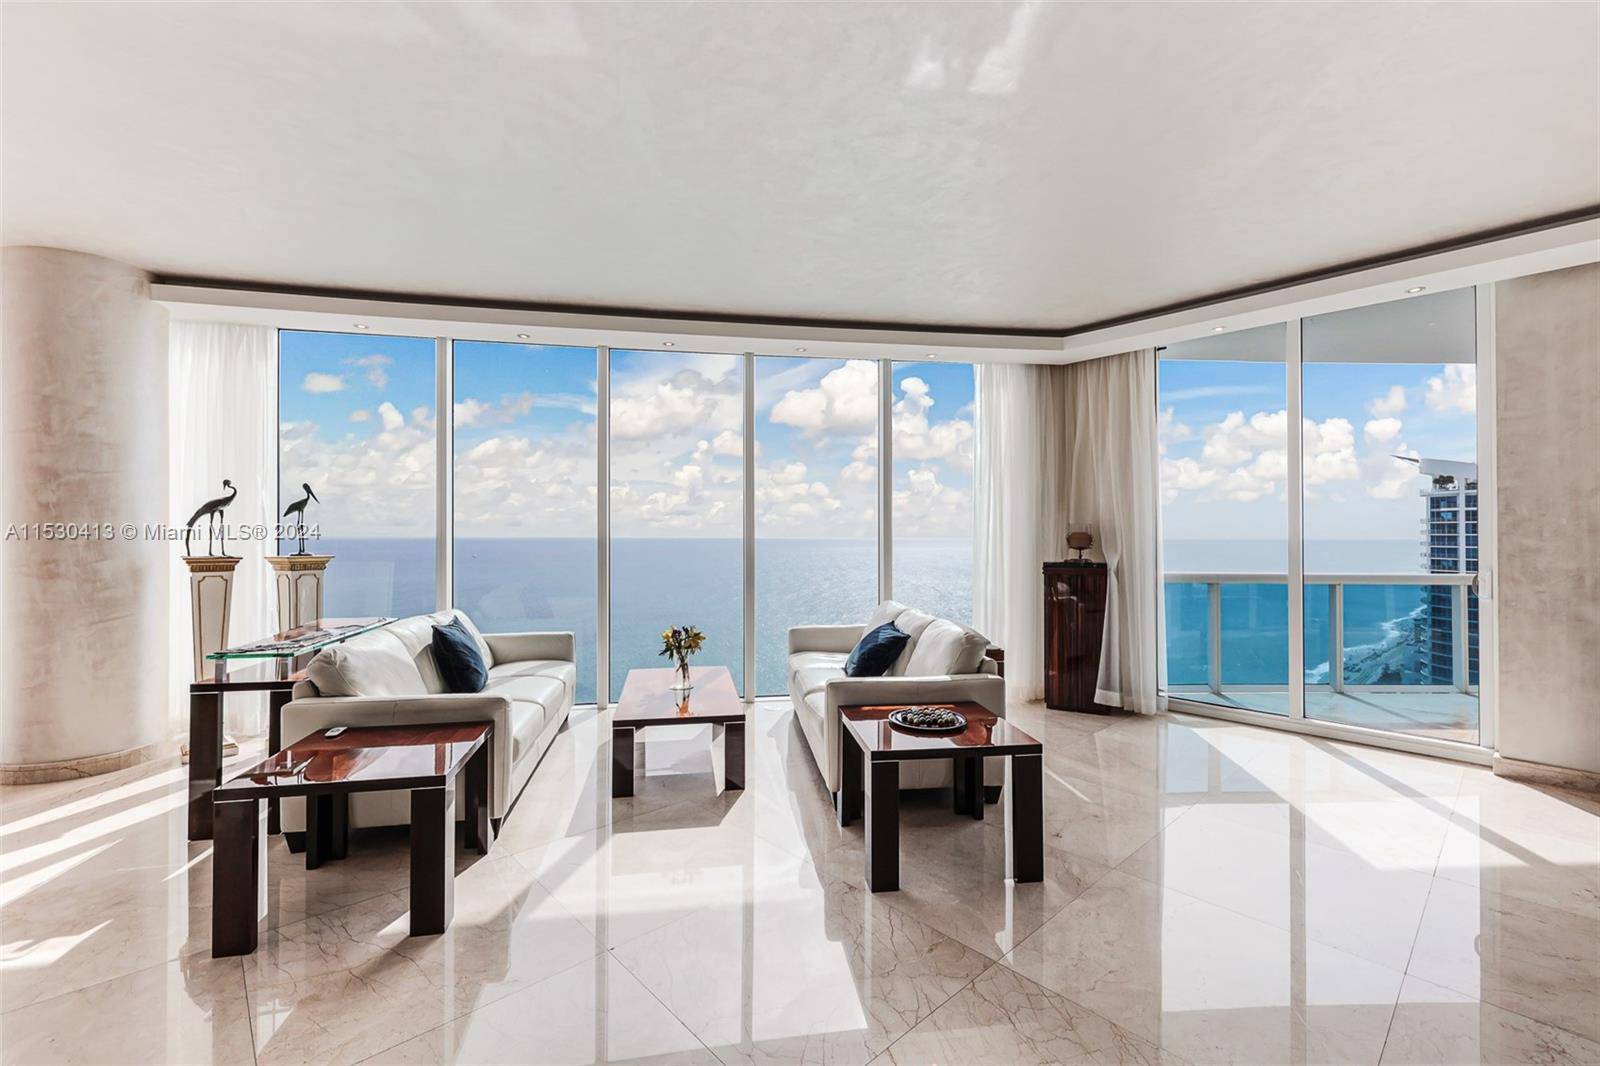 This premier SE corner residence is rarely available and truly exceptional.